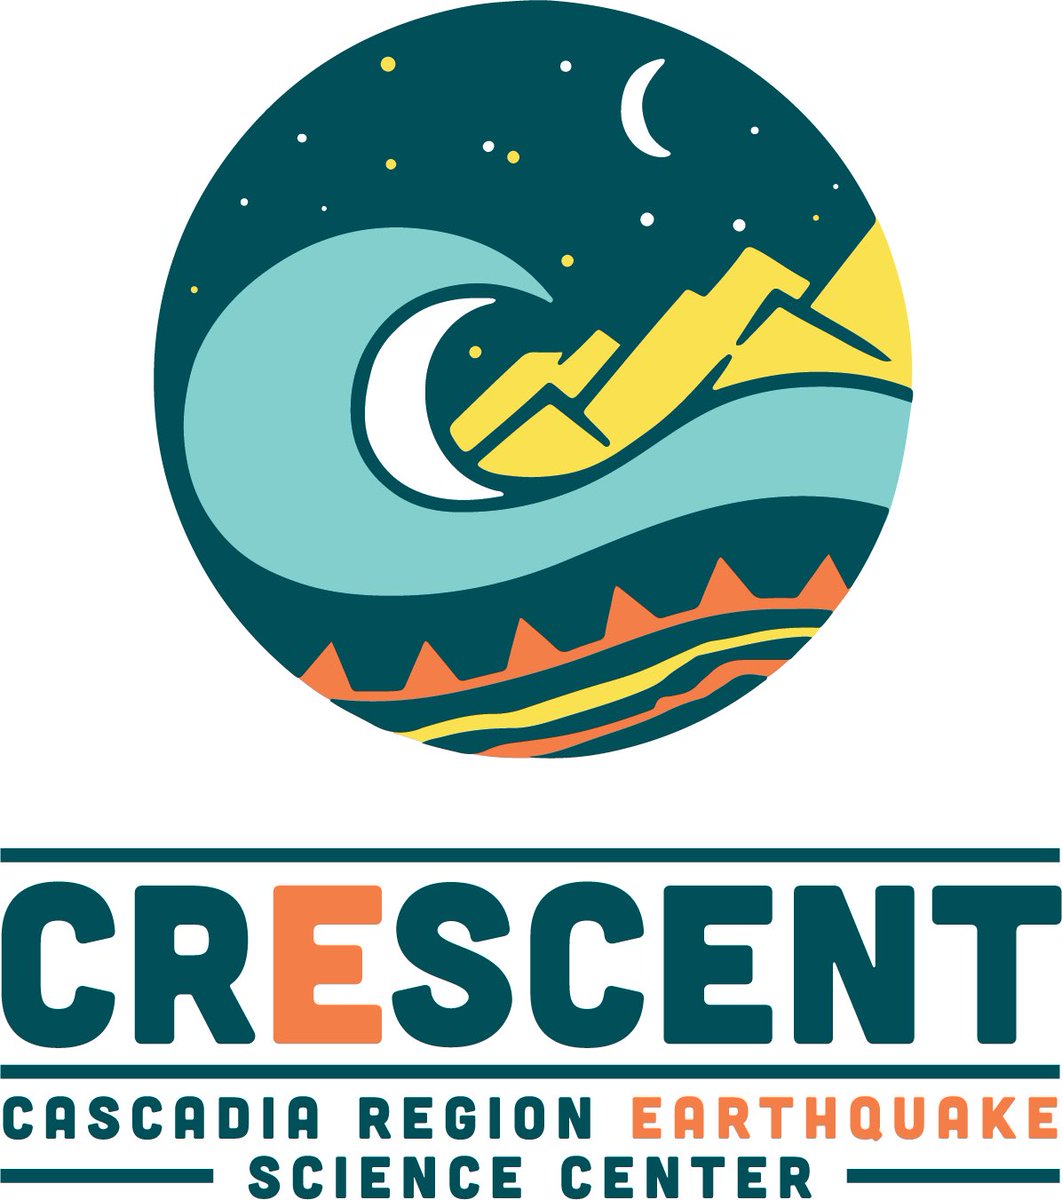 Thanks to the organizers (@geosmx and many others) of the new Cascadia Region Earthquake Science Center @cascadiaEQs for an engaging and productive kickoff meeting. Looking forward to future collaborations and the incredible science that the next 5 years will bring.